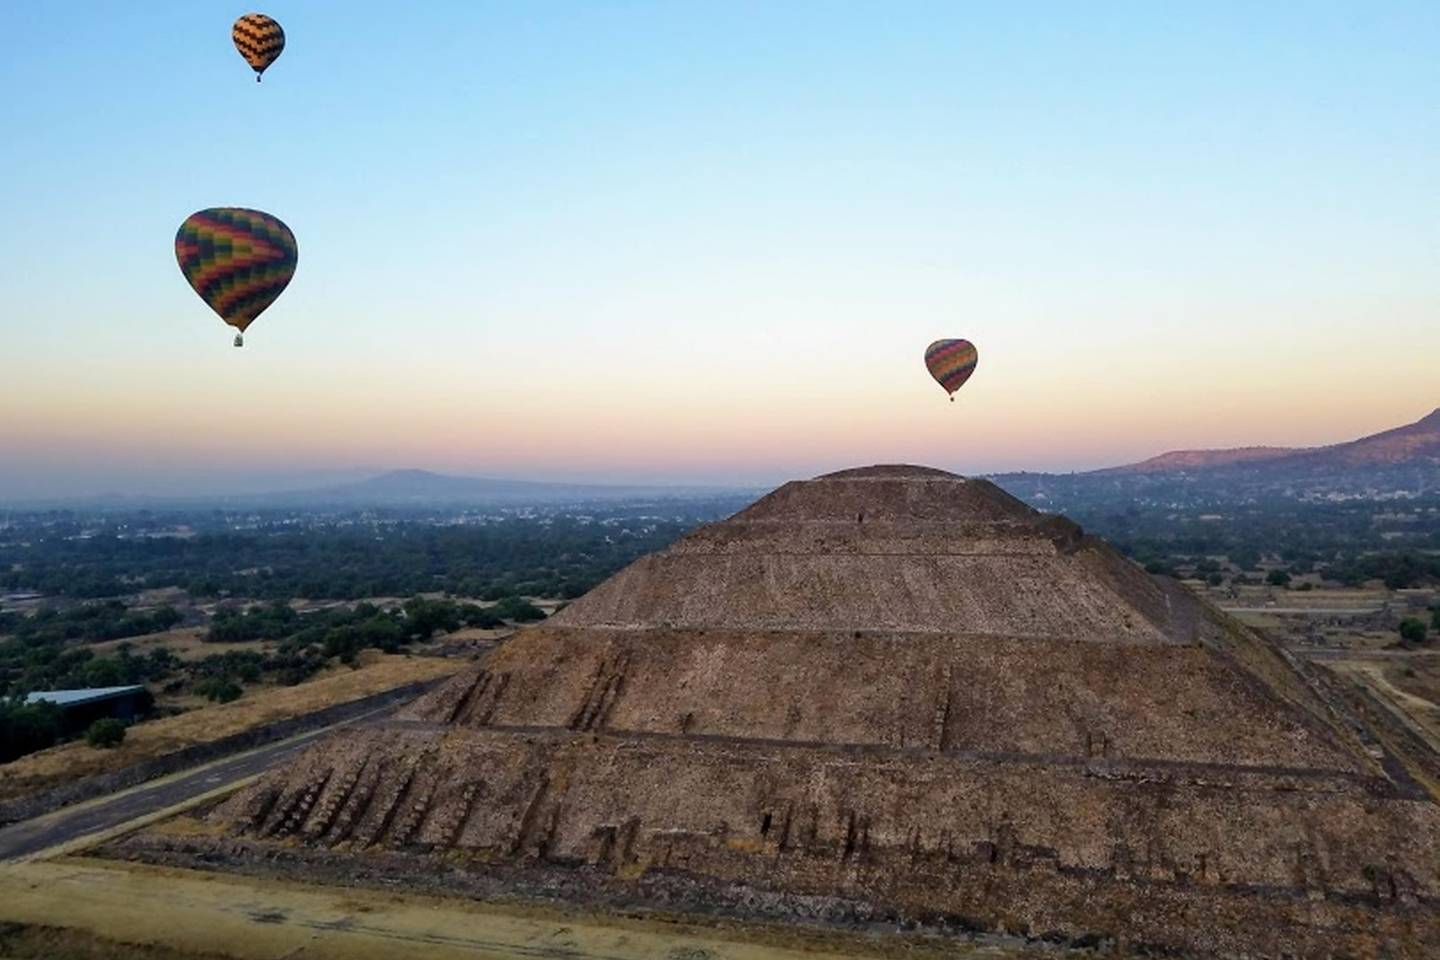 Flying air balloons in Teotihuacan Mexico